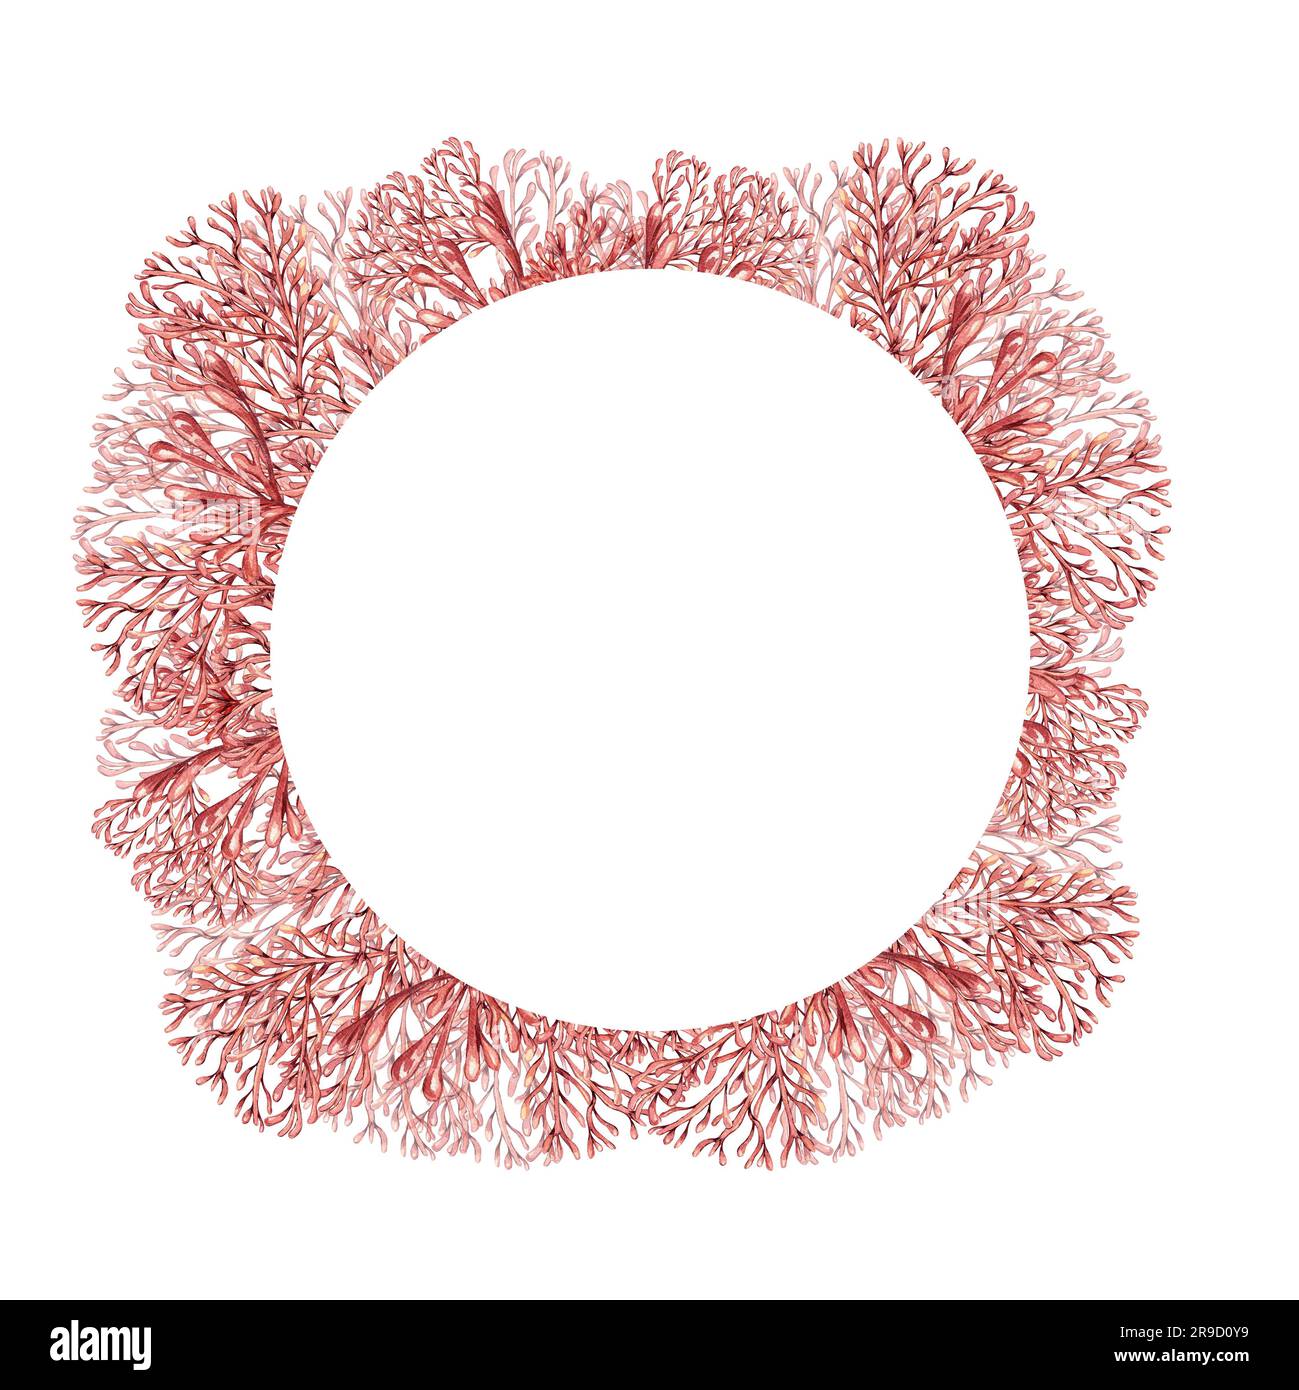 Frame of sea plants, coral watercolor illustration isolated on white background. Pink agar agar seaweed, phyllophora hand drawn. Design for package, l Stock Photo